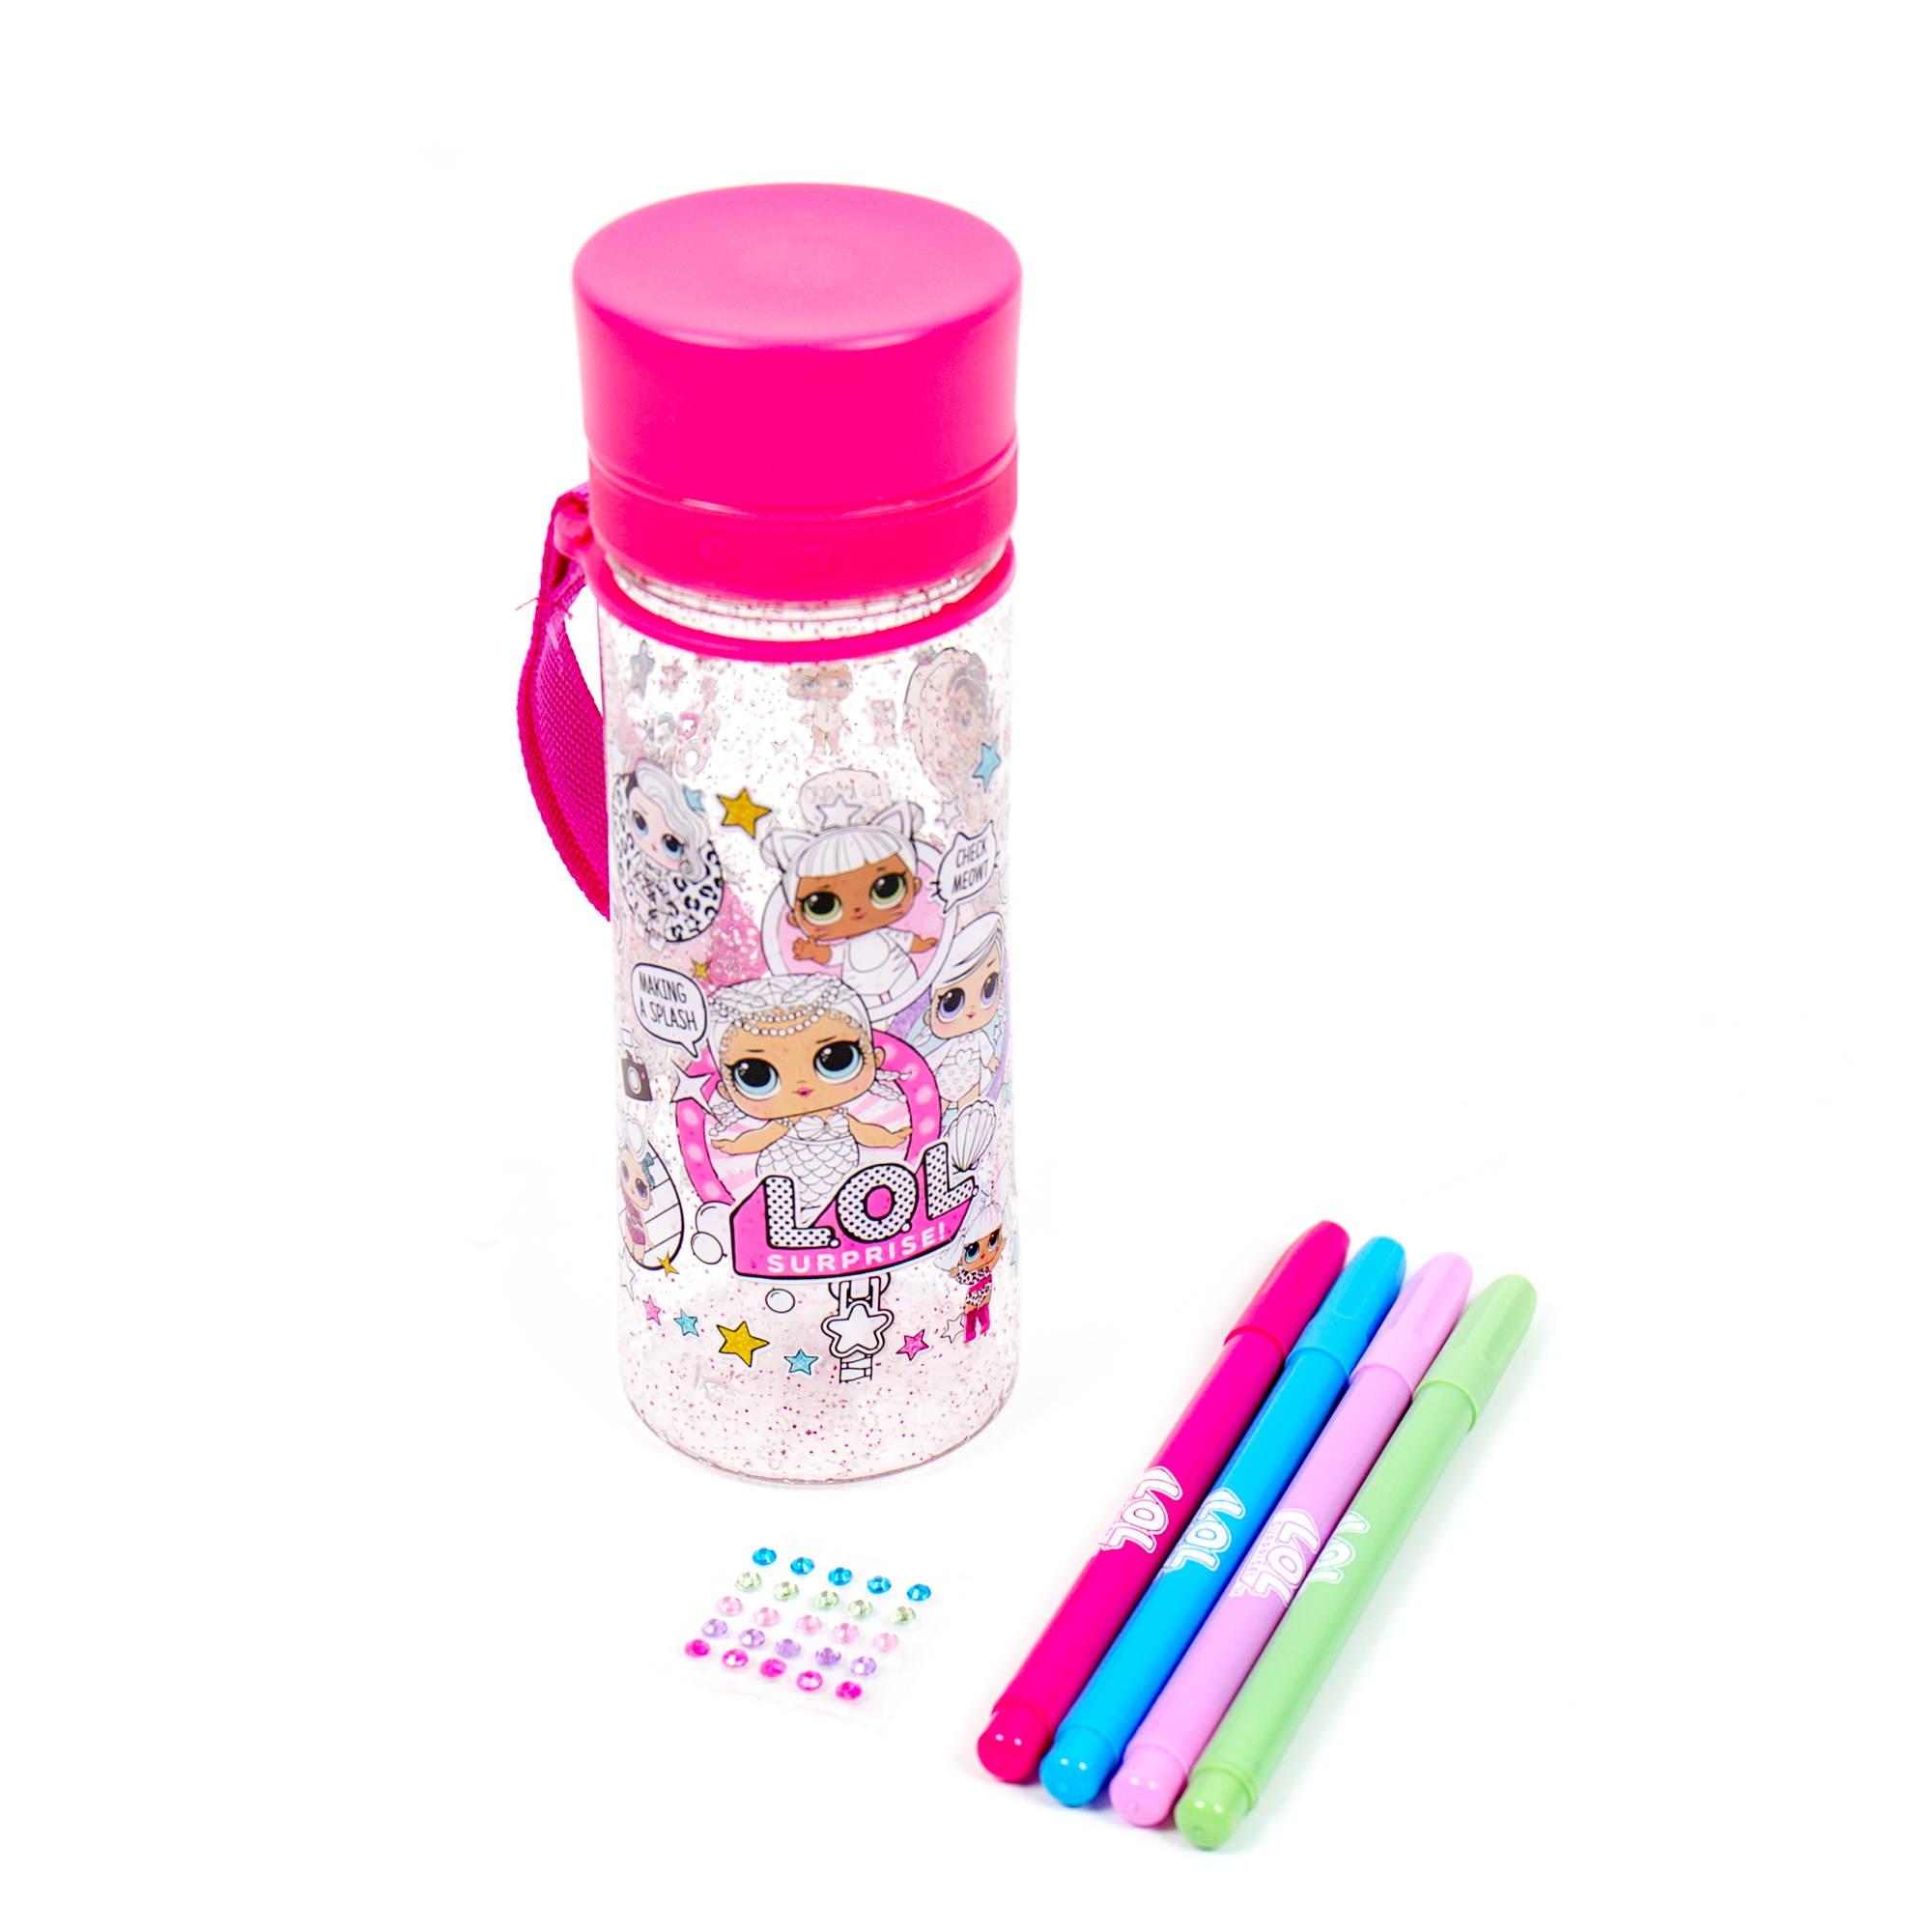 L.O.L. Surprise! Color Your Own Glitter Water Bottle for Kids Ages 5+, BPA-Free - image 5 of 6